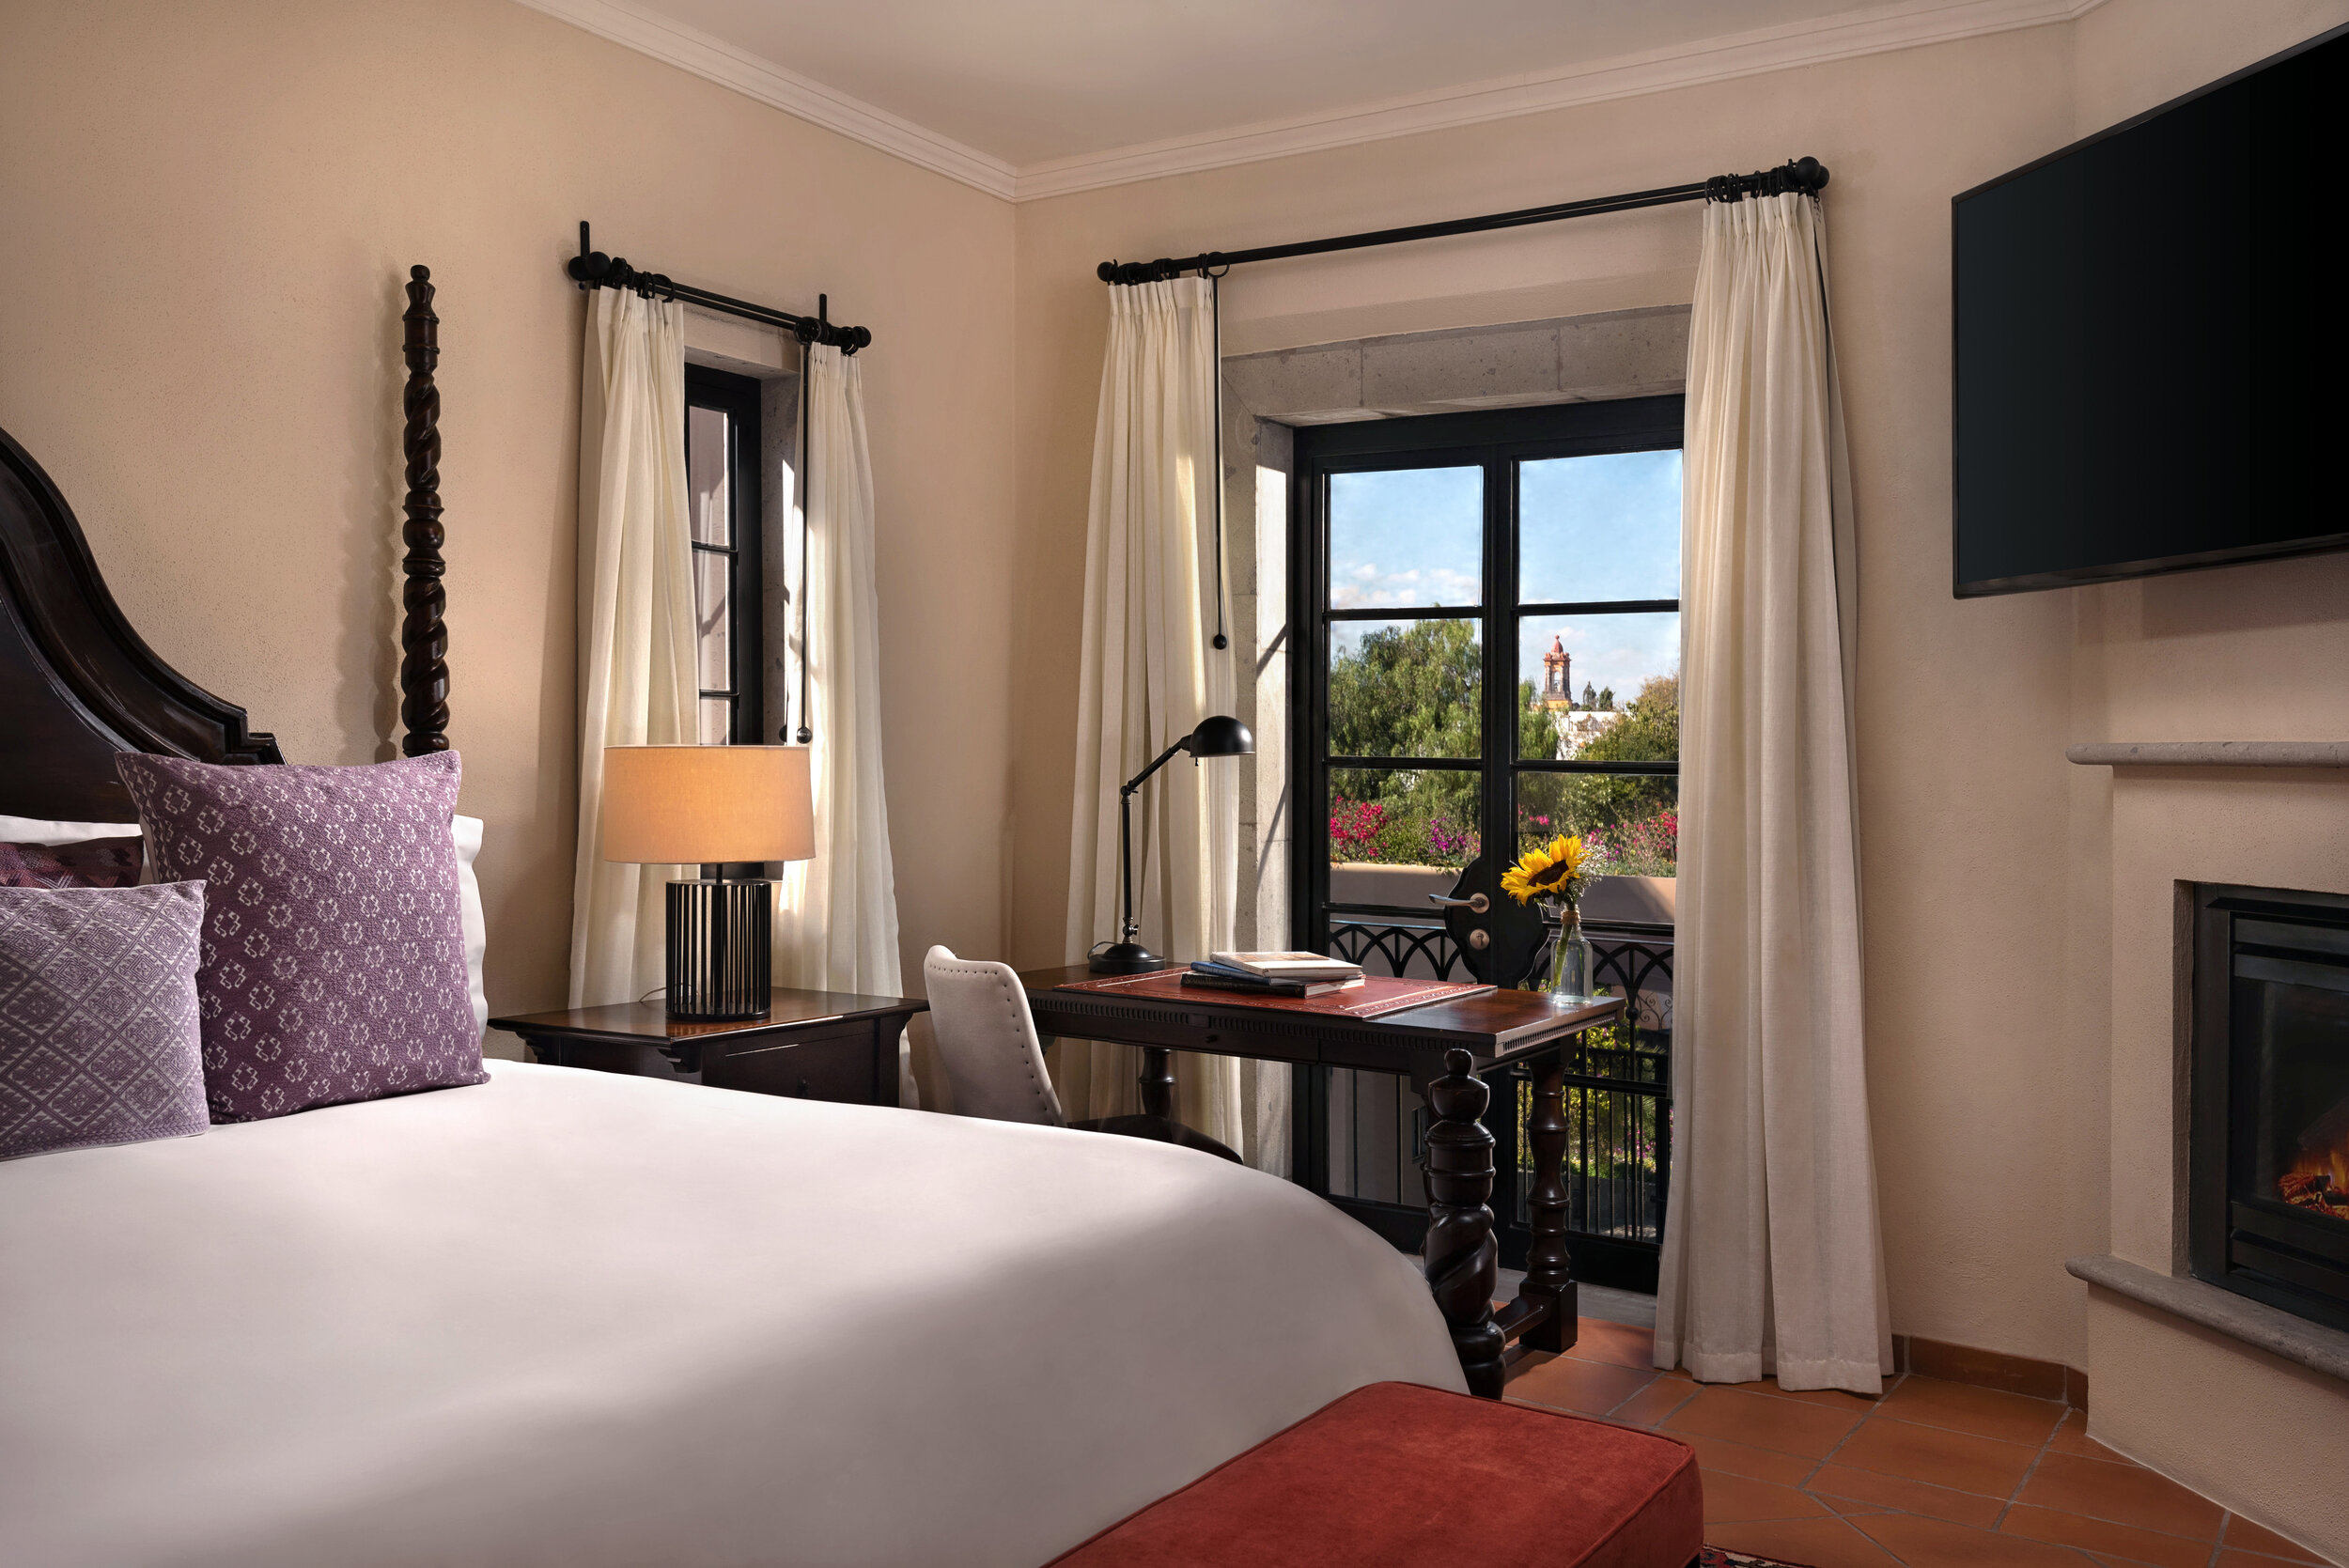   A bedroom in a 2-bedroom residence (photo credit: Rosewood Hotels)  